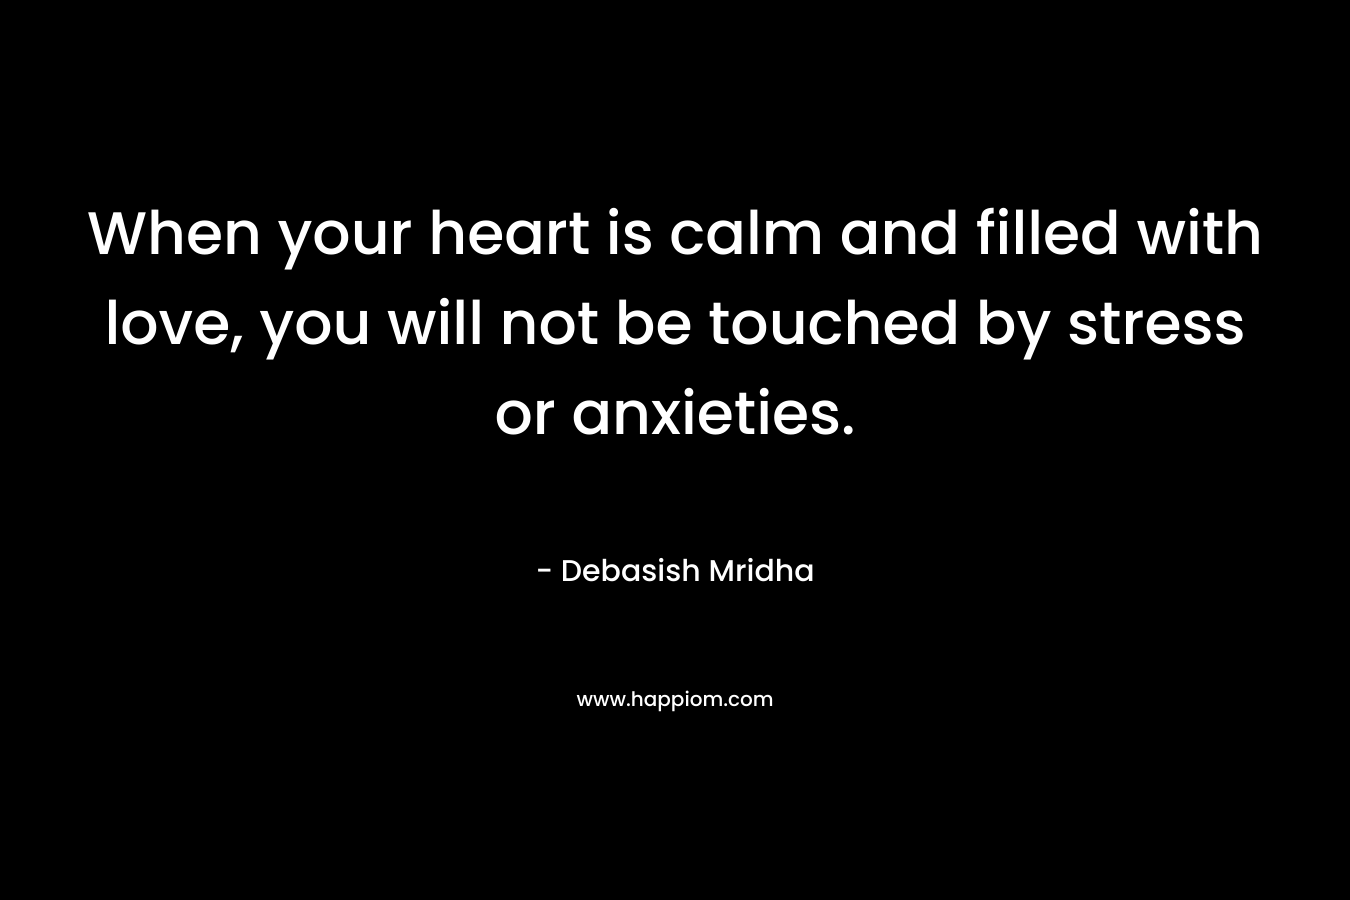 When your heart is calm and filled with love, you will not be touched by stress or anxieties. – Debasish Mridha